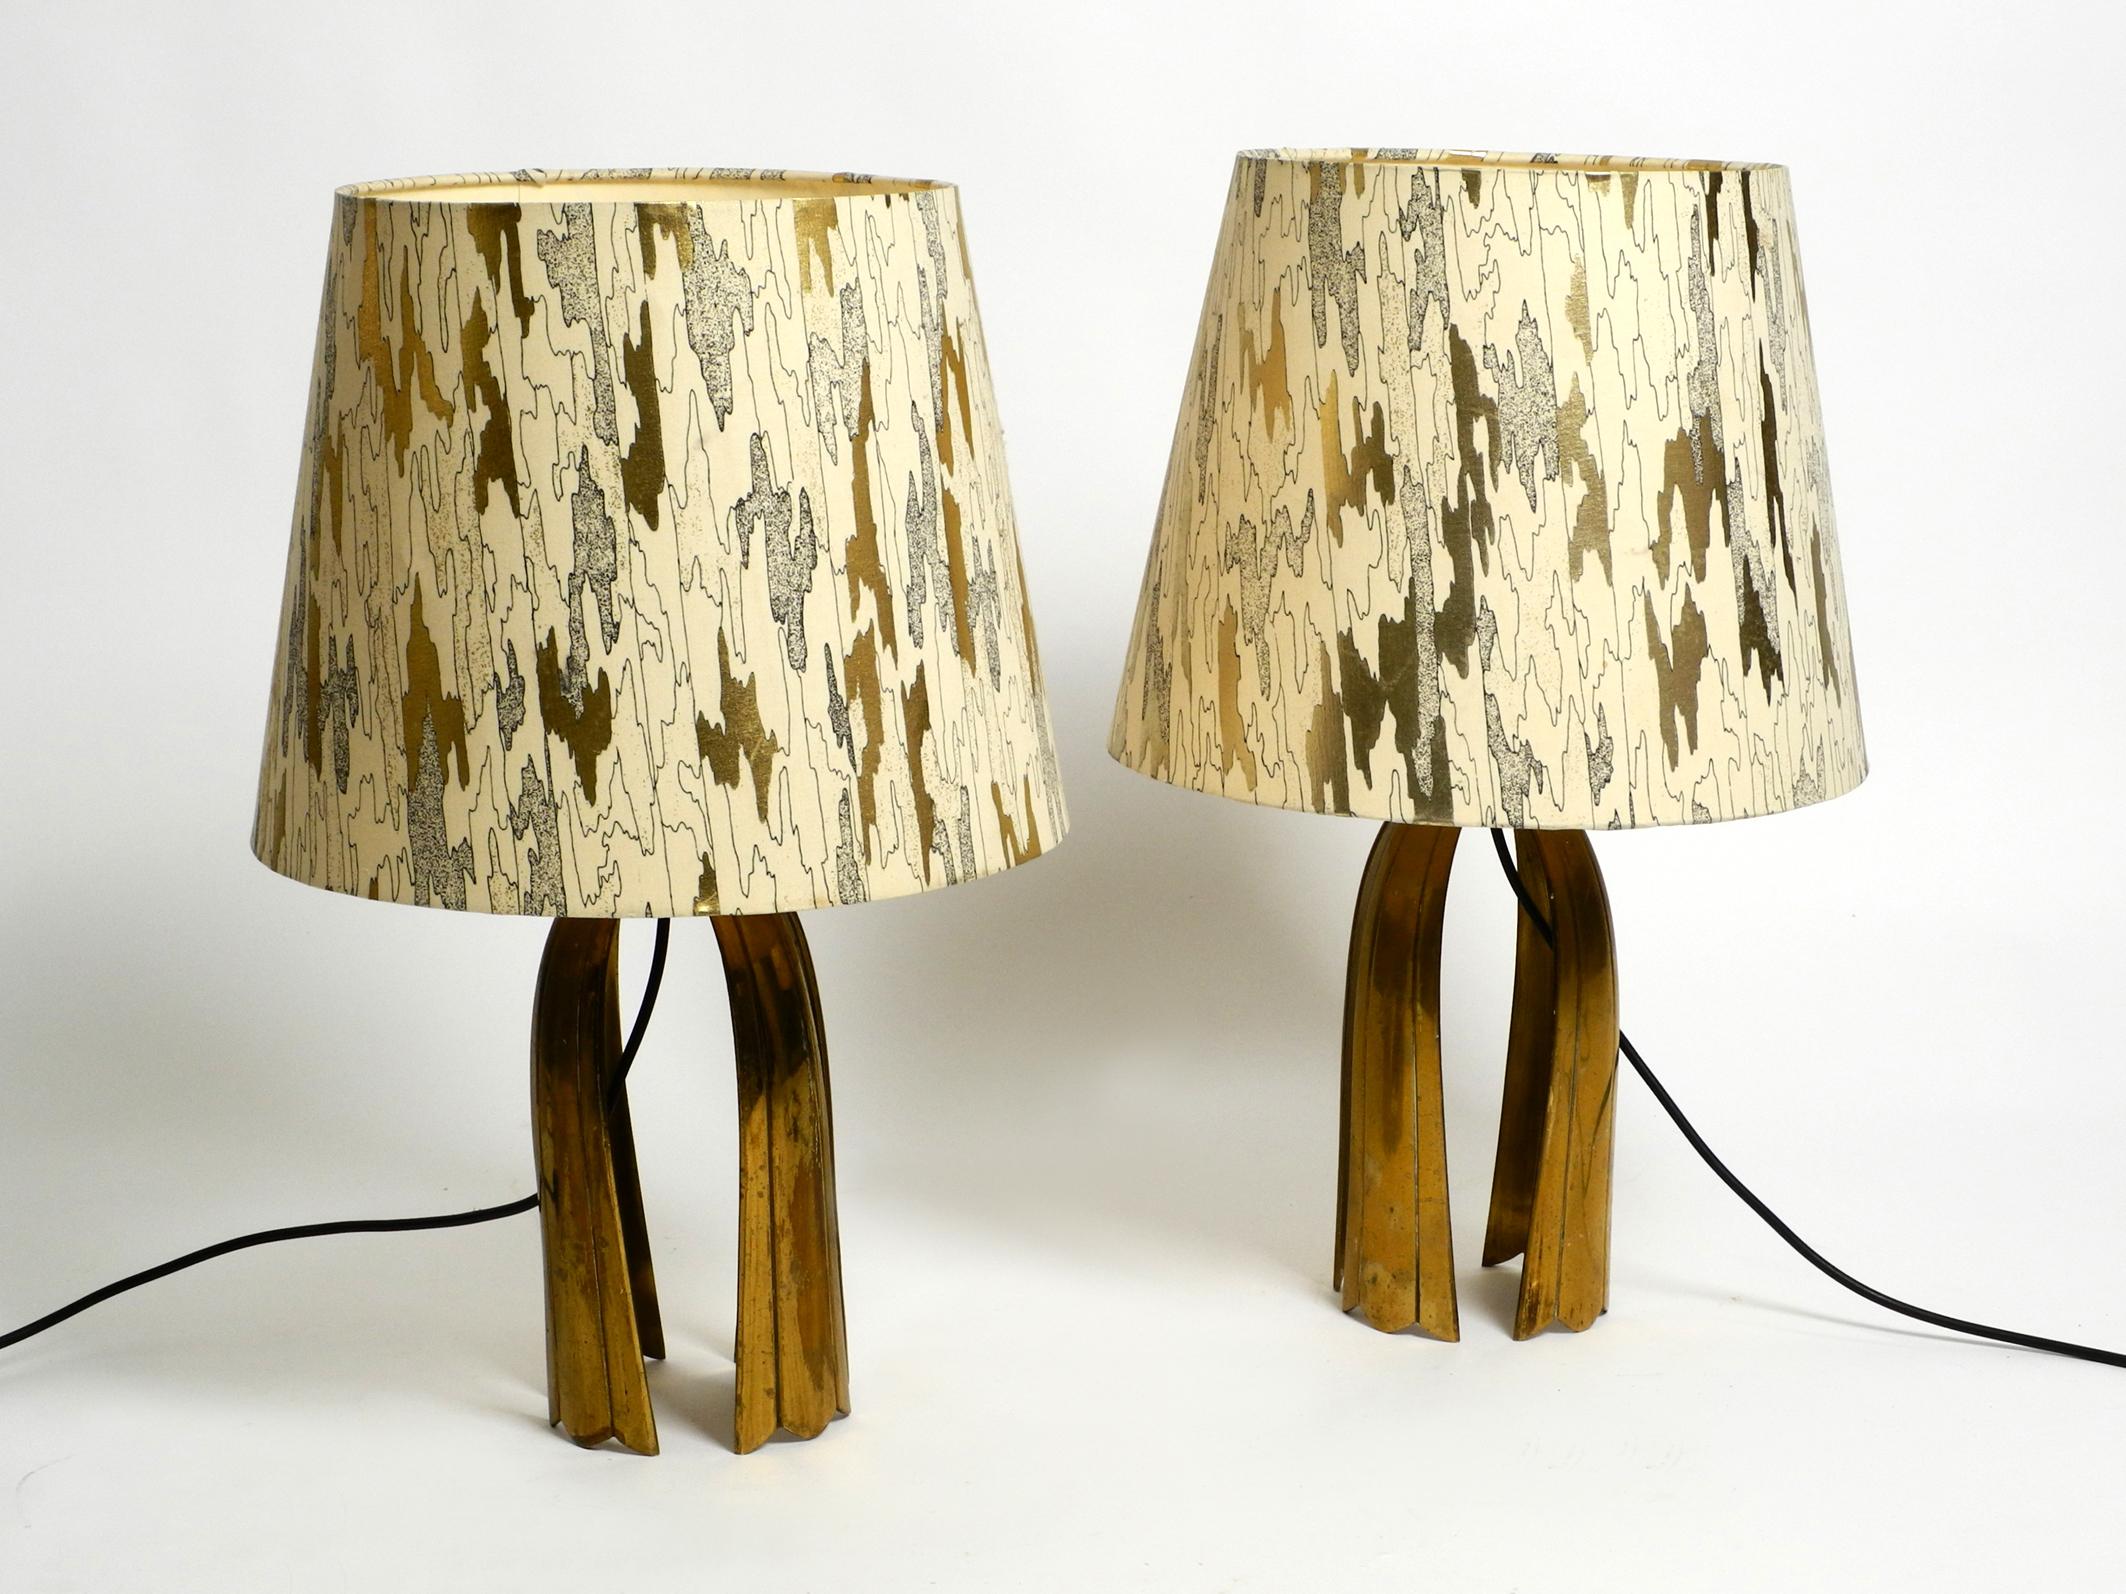 Pair of large stunning Mid Century Modern brass table lamps.
These lamps are so beautiful, the beauty can not be shown in the photos as they are in real.
The large lampshades are not original but also from the 70s and fit perfectly in color and